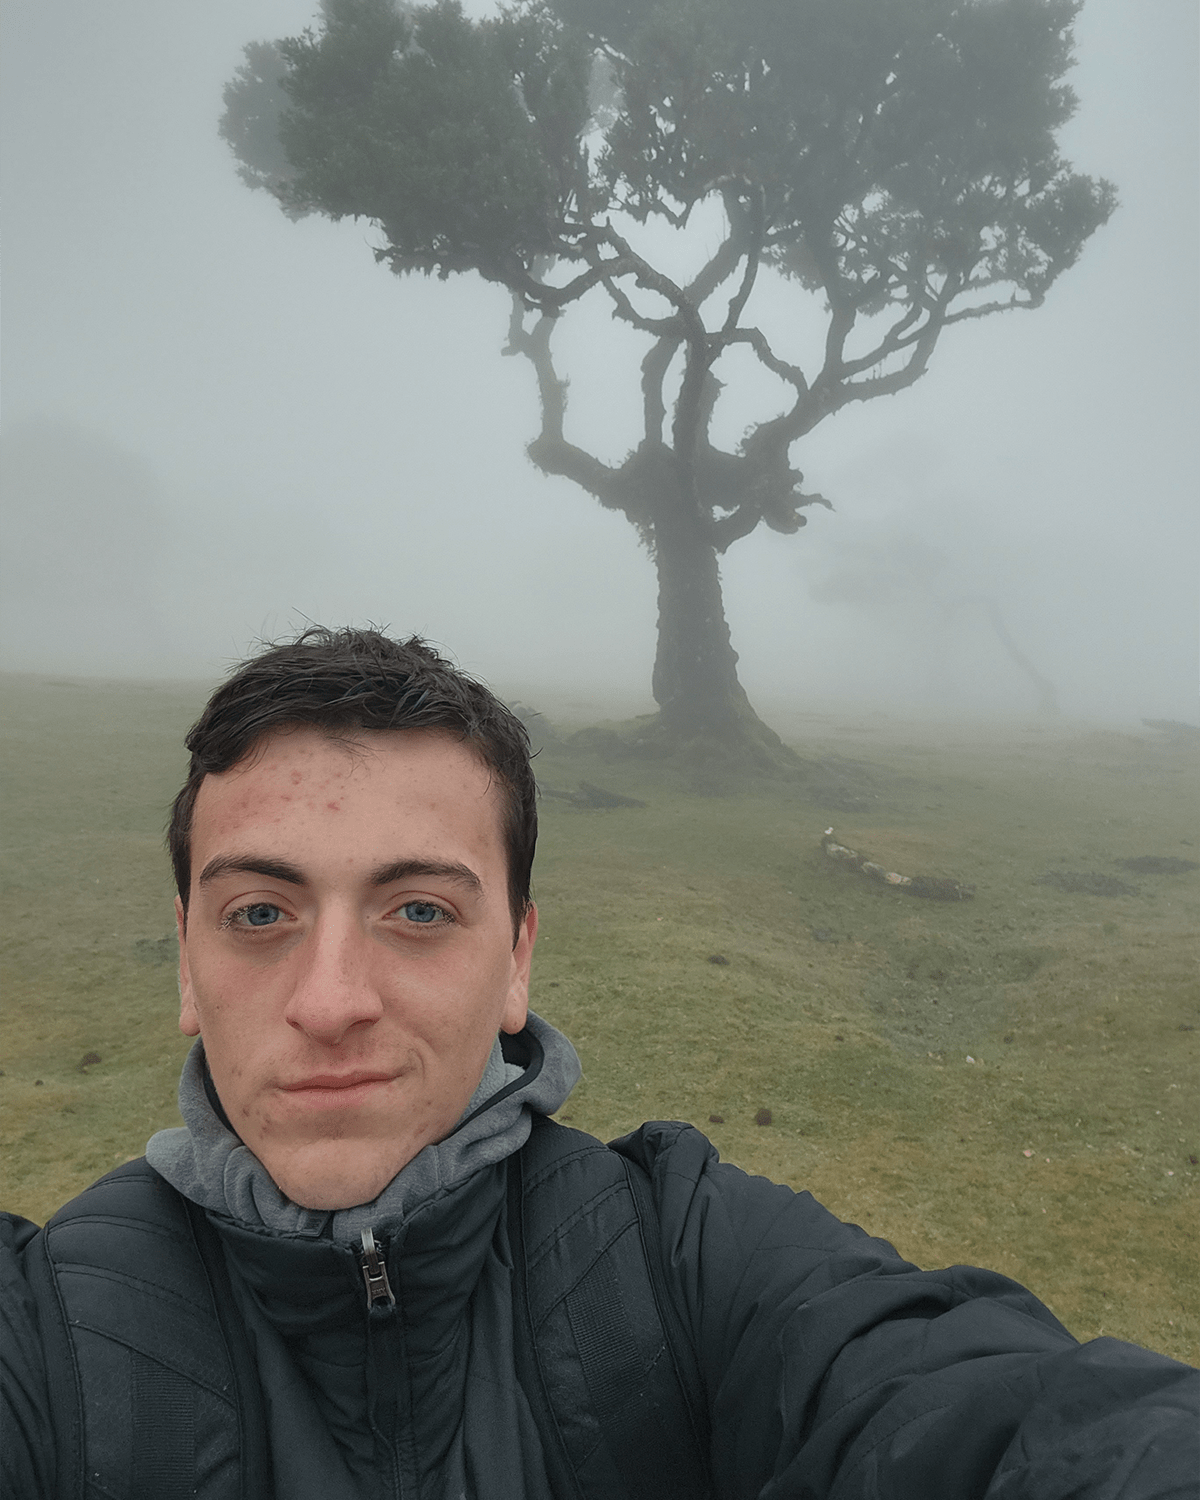 During a trip to the Fanal Forest in Madeira, Portugal, Dual Enrollment student Zackrey Schraeder snapped this foggy day selfie. (Photo: Zackrey Schraeder)